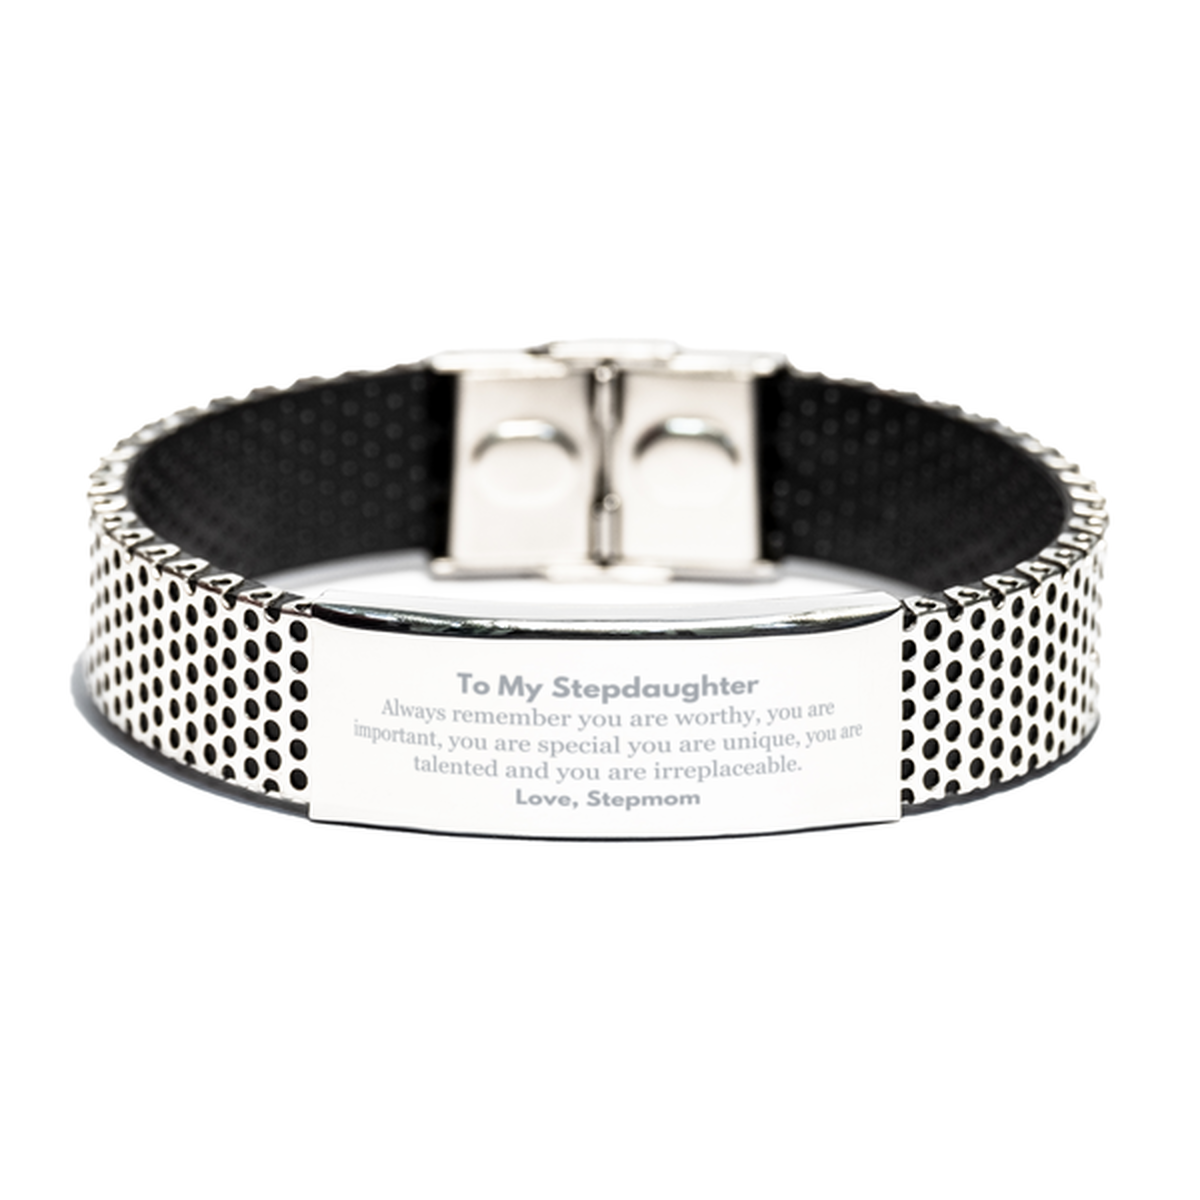 Stepdaughter Birthday Gifts from Stepmom, Inspirational Stainless Steel Bracelet for Stepdaughter Christmas Graduation Gifts for Stepdaughter Always remember you are worthy, you are important. Love, Stepmom